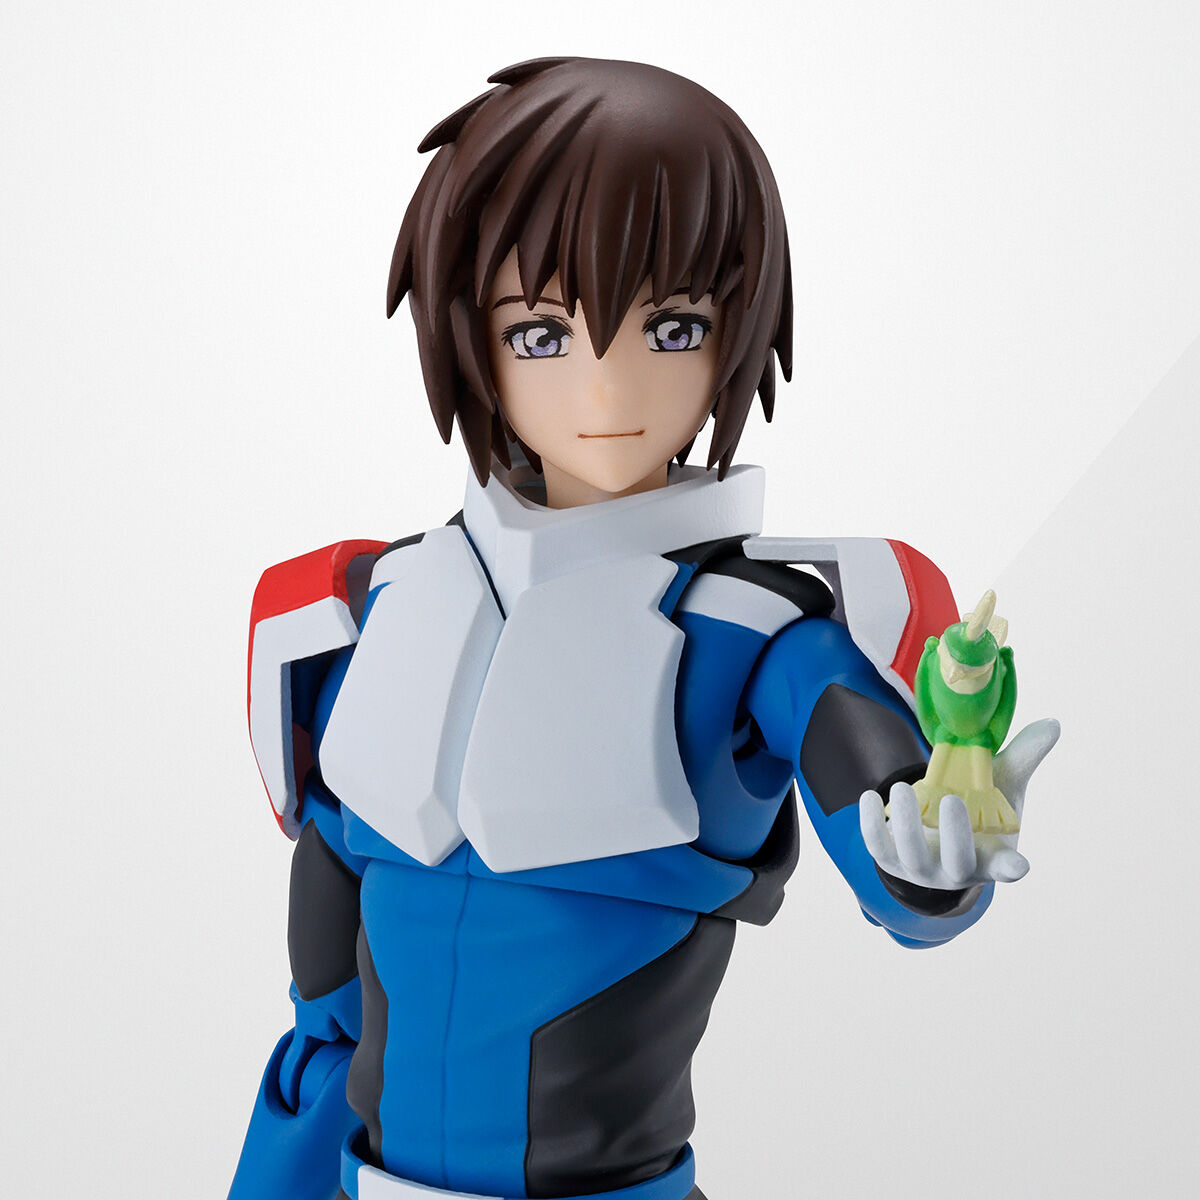 [PREORDER] SH Figuarts Kira Yamato (Compass Pilot Suit Ver) - Mobile Suit Gundam SEED Freedom